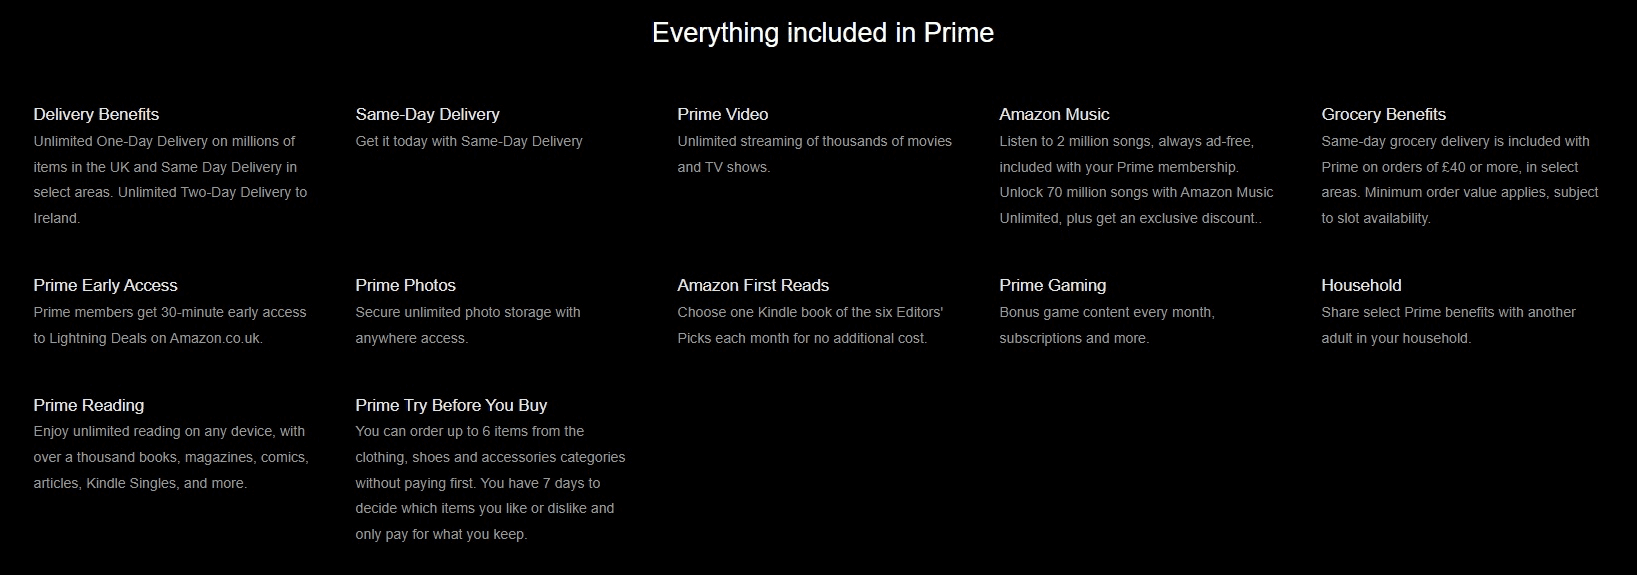 All the perks of Amazon Prime in one subscription only!